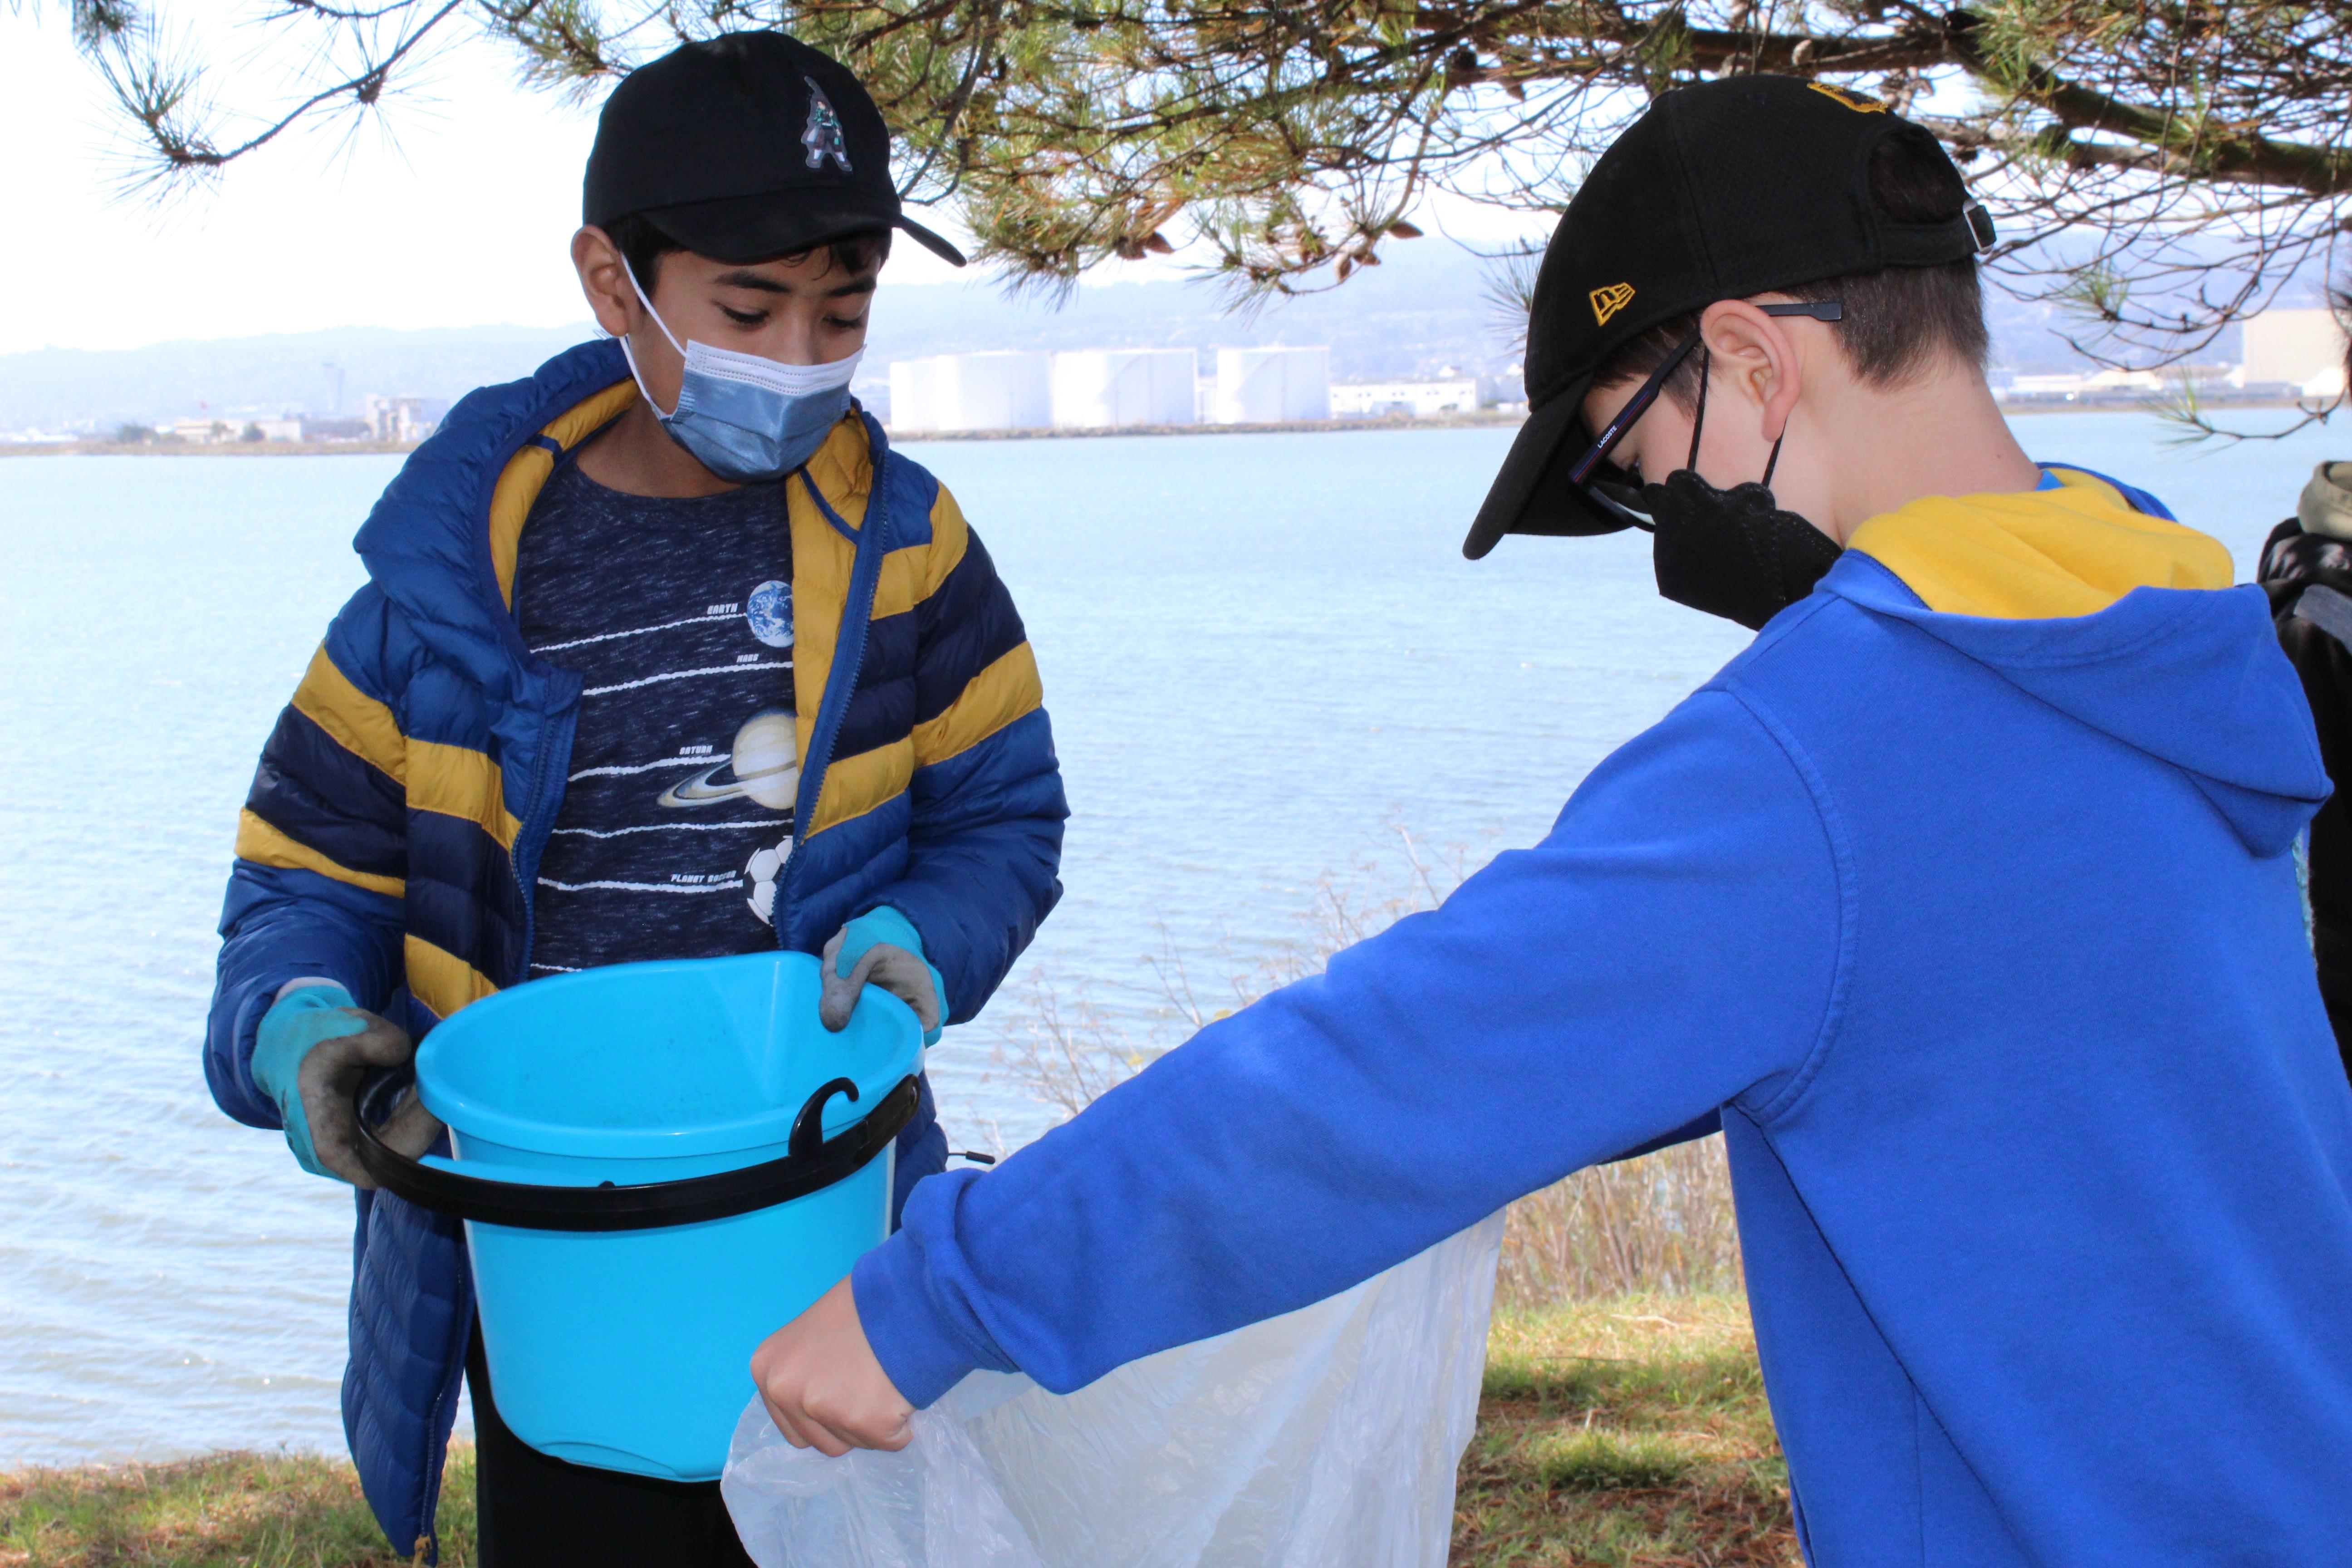 Westborough Middle School students learn about environmental stewardship and civic responsibility during the school's quarterly shoreline cleanup events.